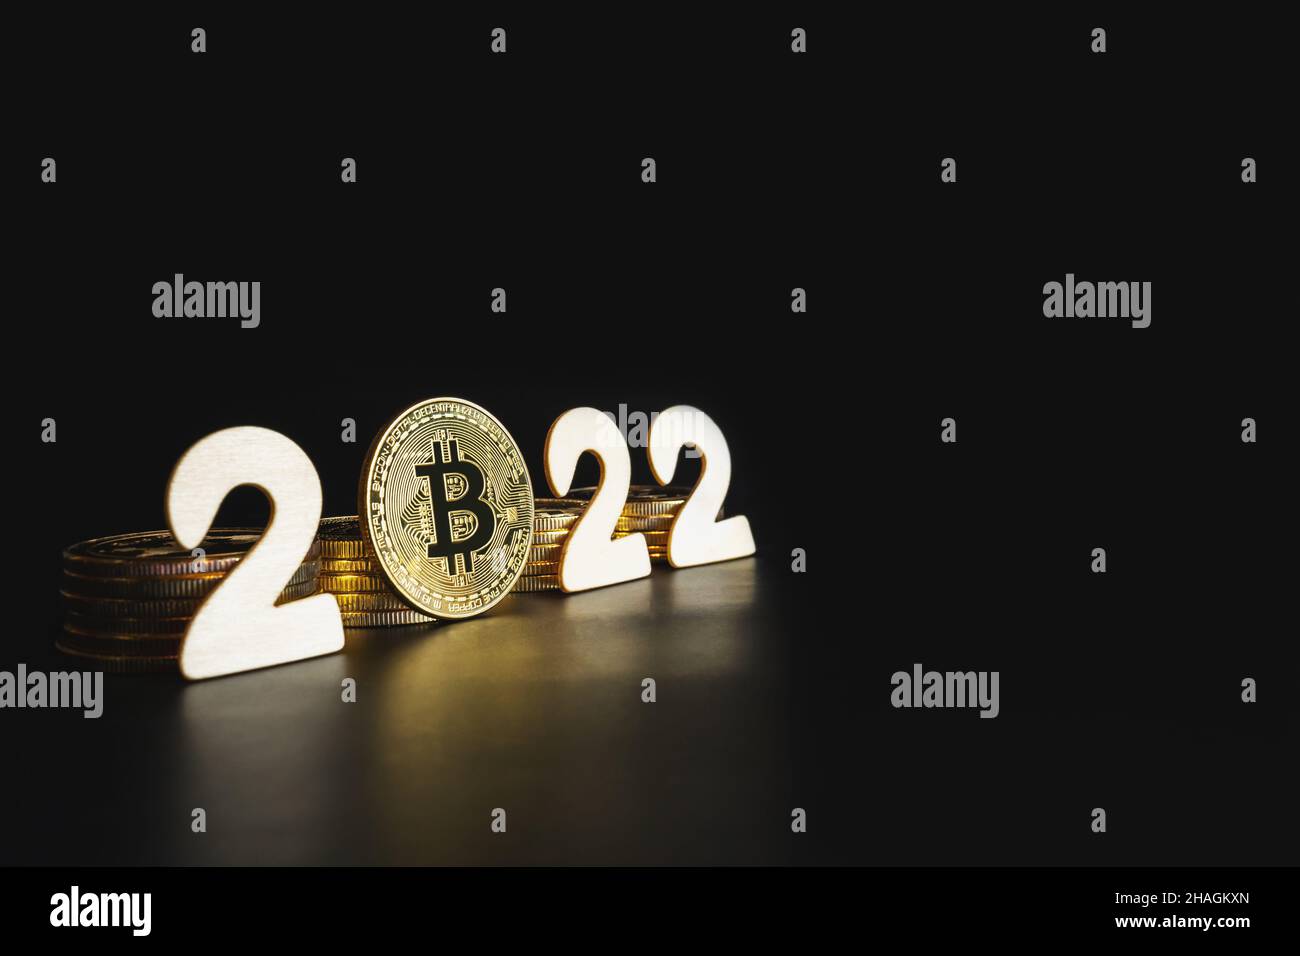 Bitcoin 2022. Single Bitcoin gold coin next to numbers on black background with copy space. Price, future value of BTC crypto prediction concept. Stock Photo